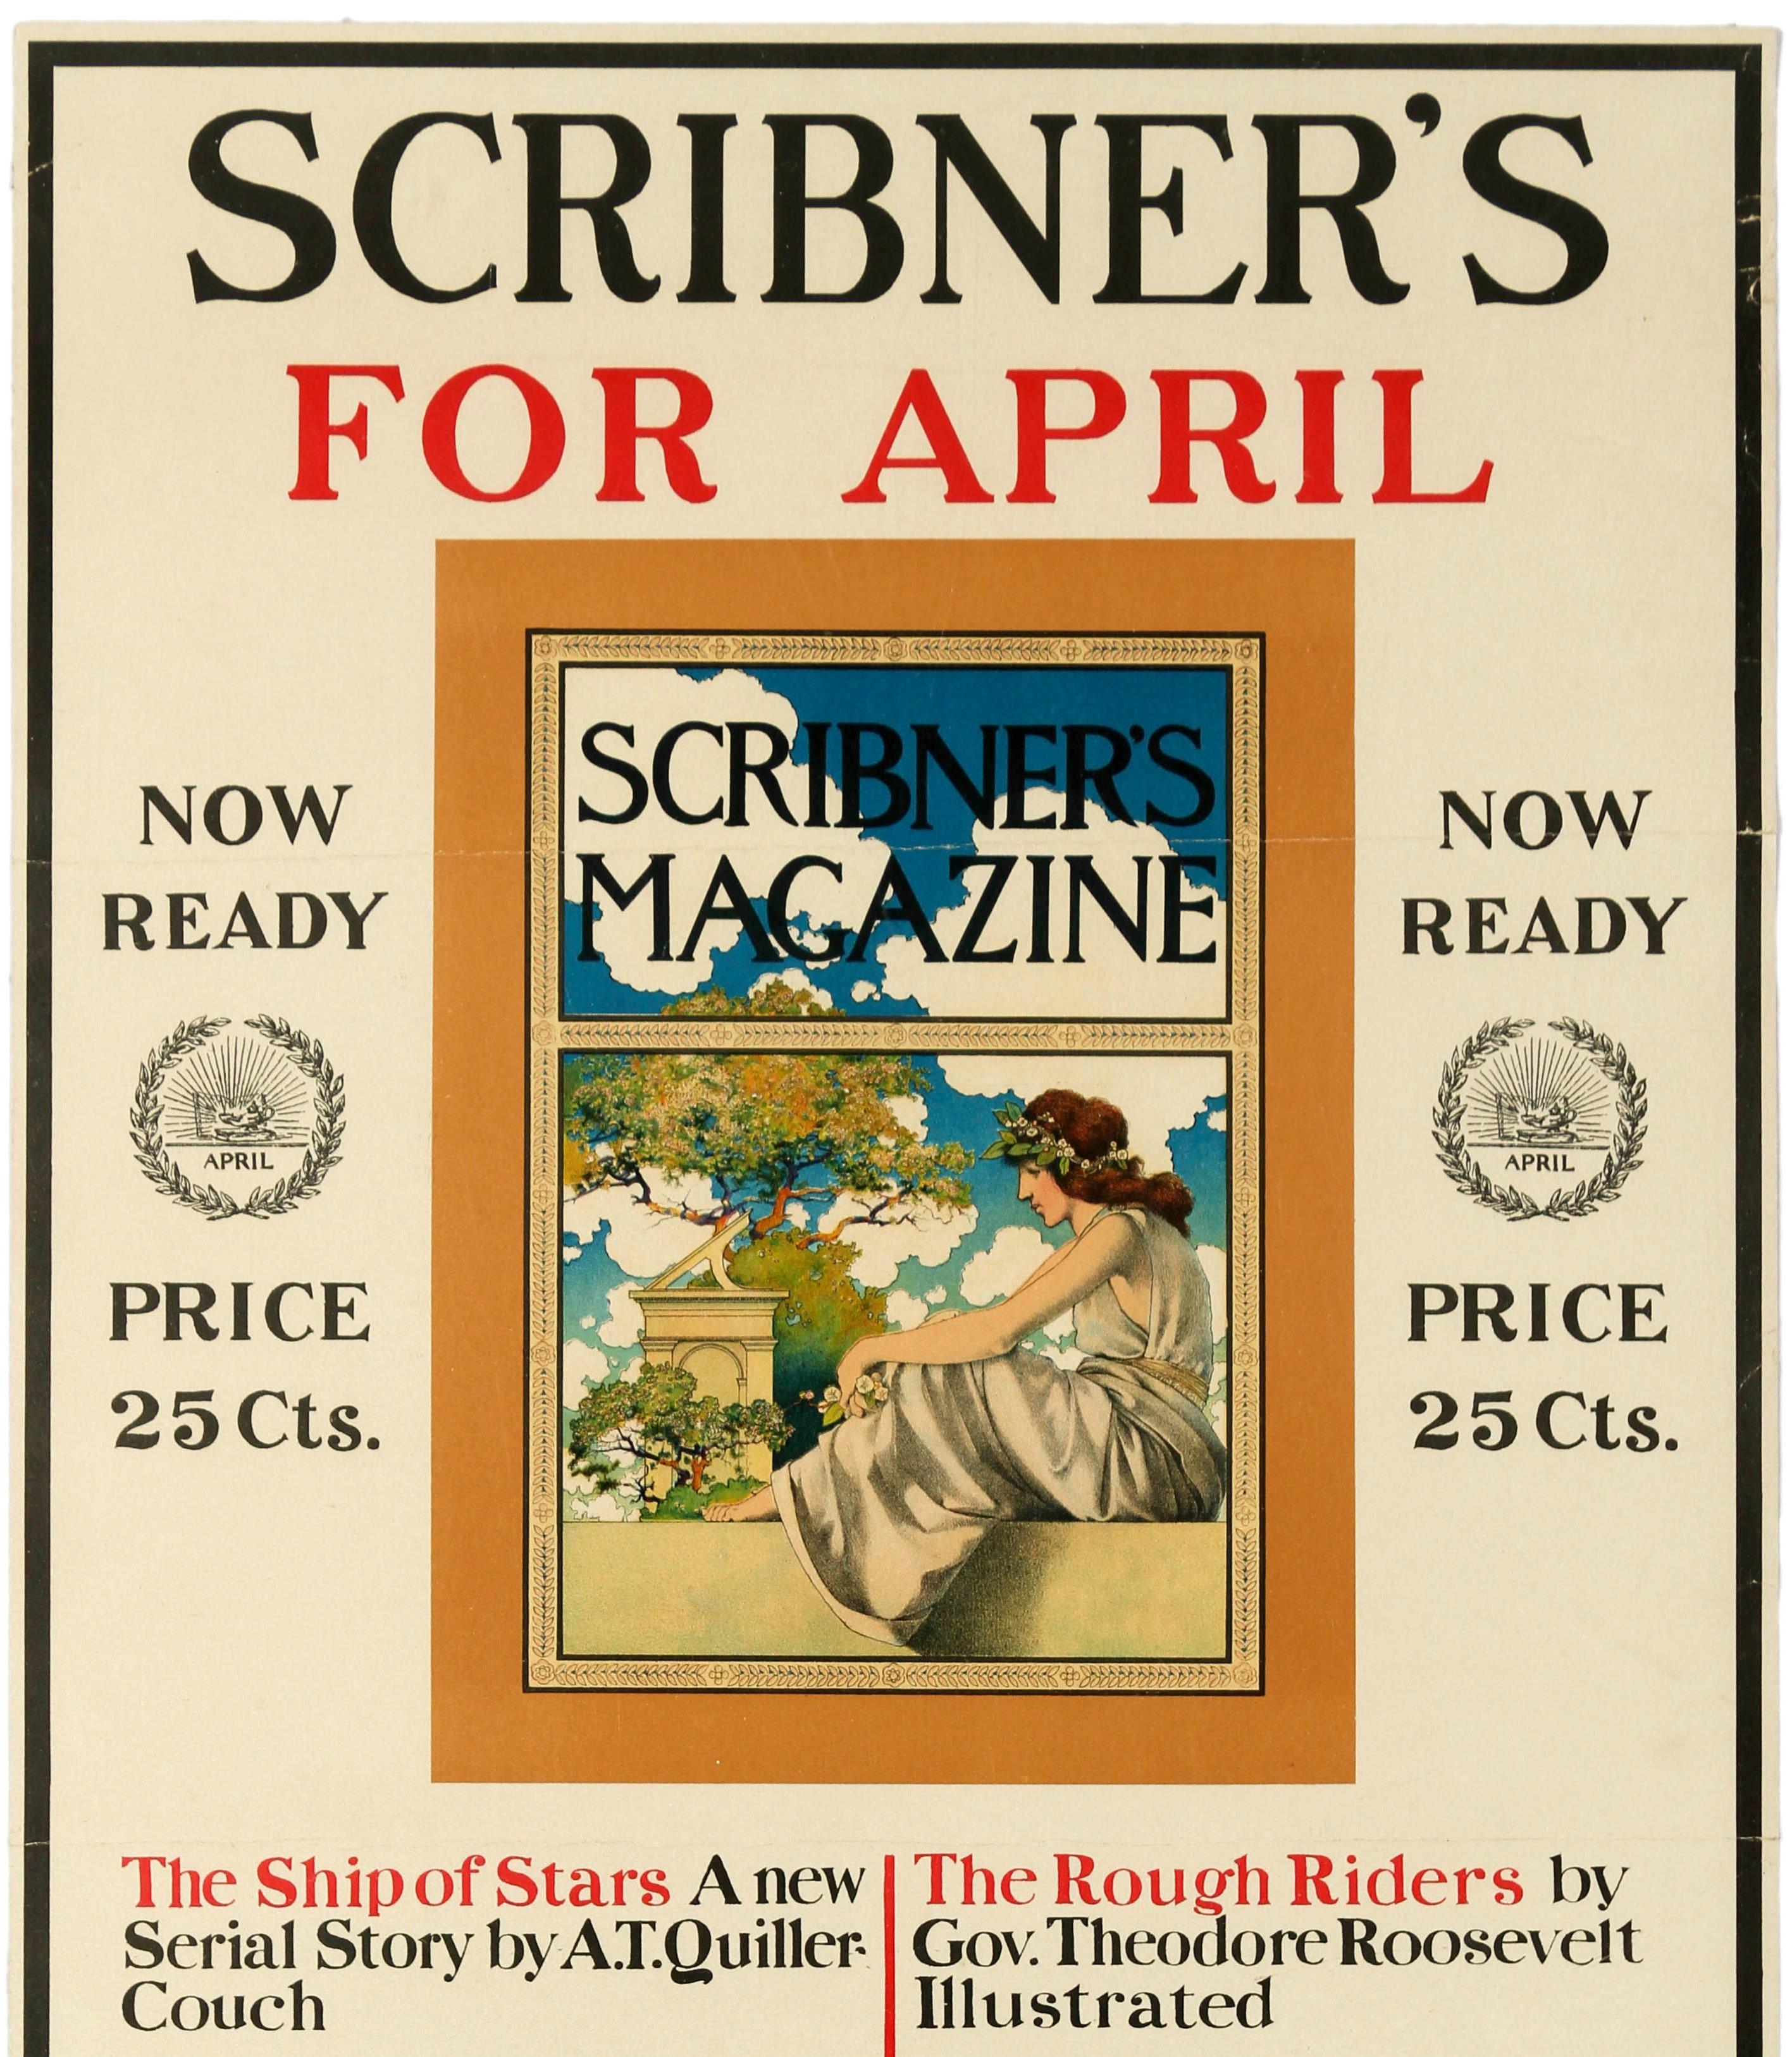 Original Antique Poster Scribner's Magazine April 1899 Illustrated Poems Stories - Print by Maxfield Parrish